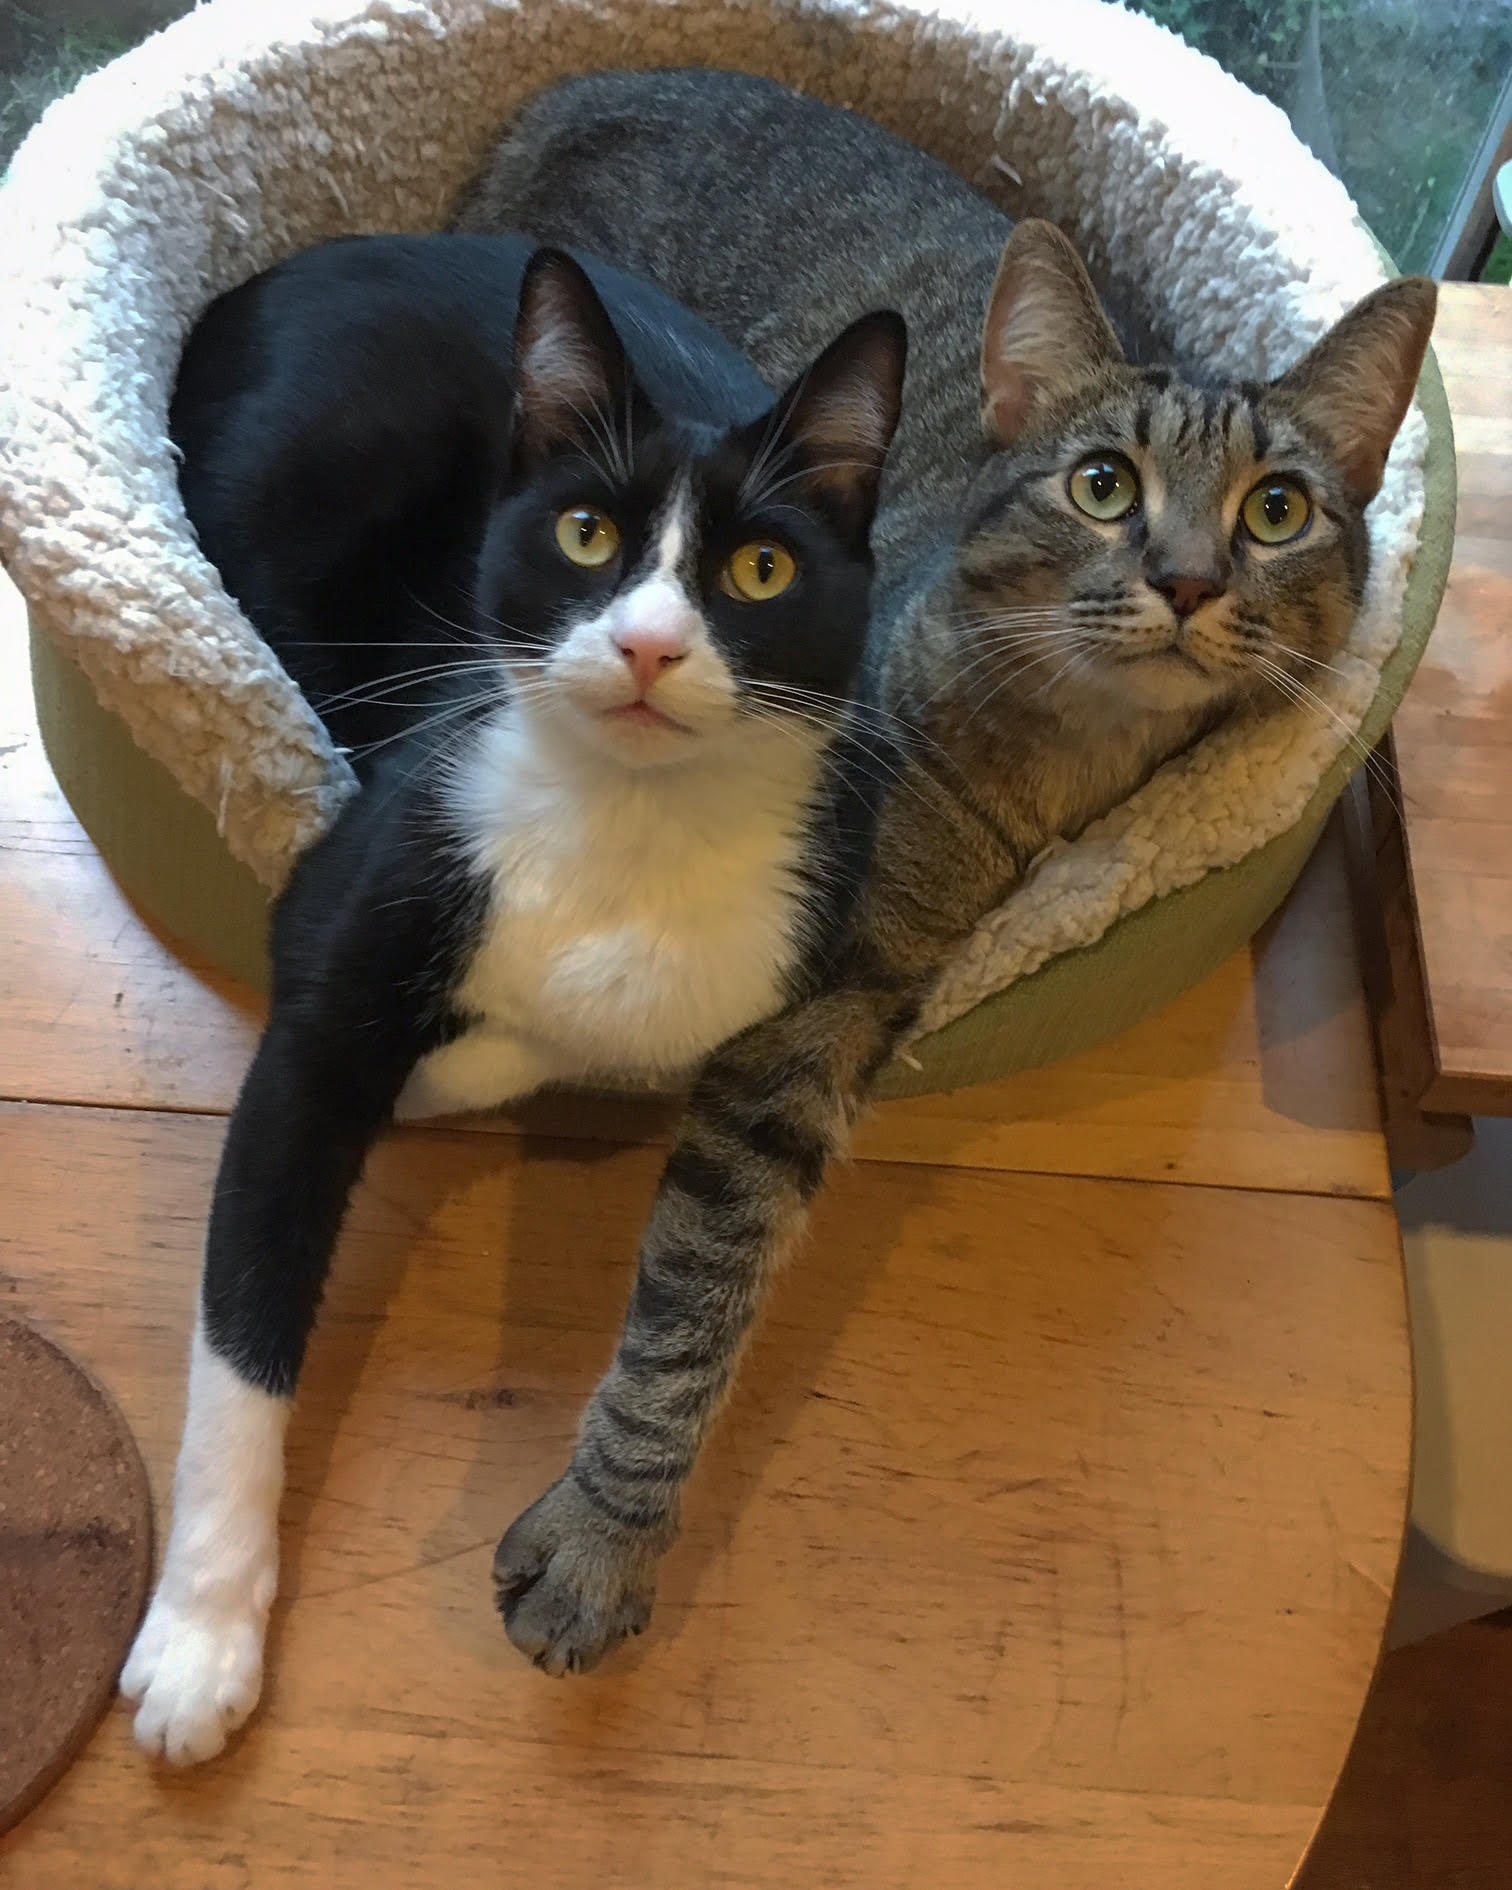 A grey tabby and a tuxedo cat cuddling together in a cat bed.